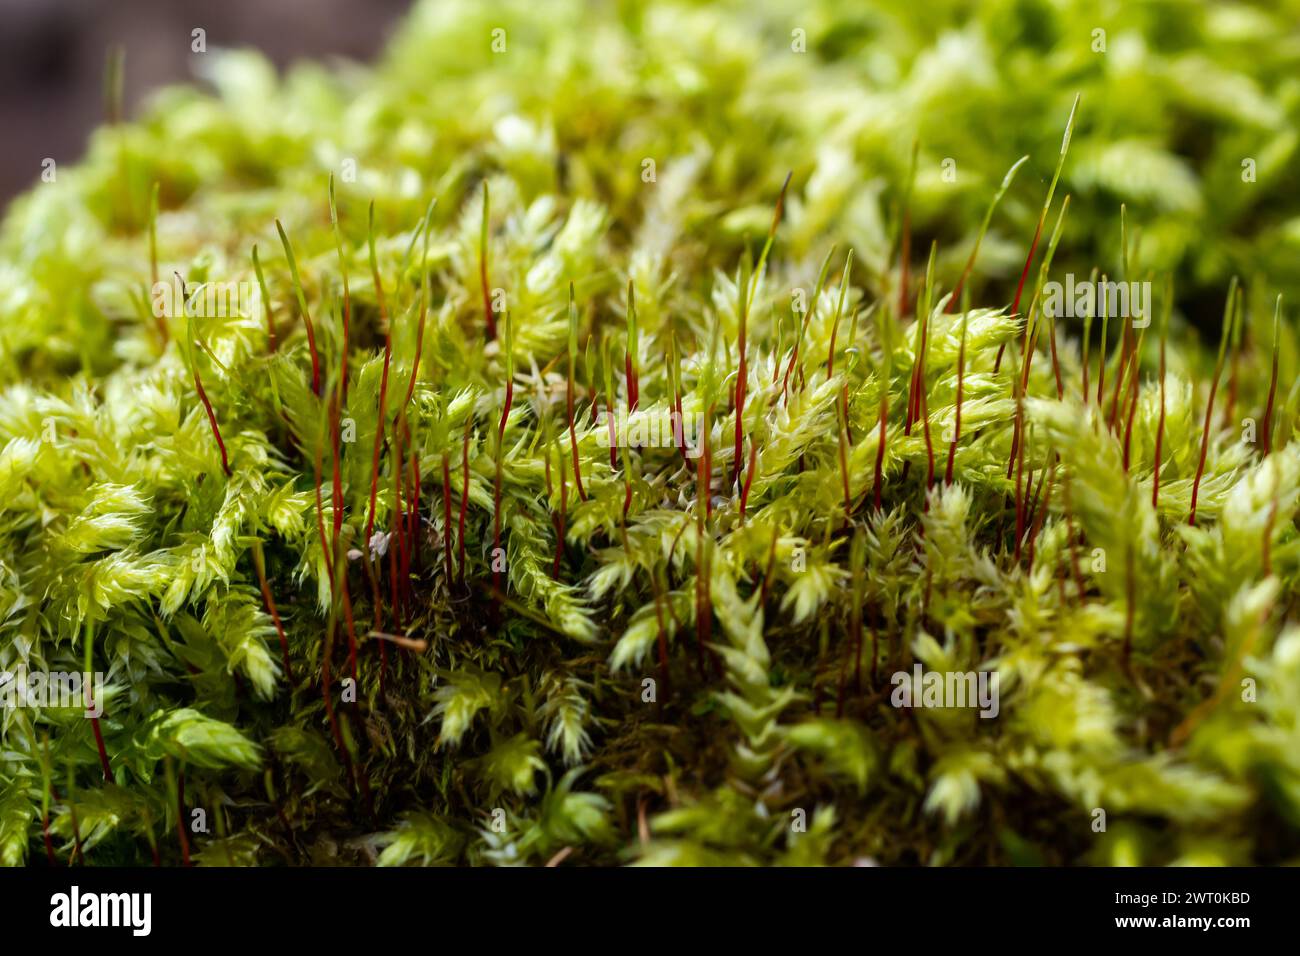 Precious drops of water from the morning dew covering an isolated plant of Ceratodon purpureus that is growing on the rock, purple moss, Burned ground Stock Photo